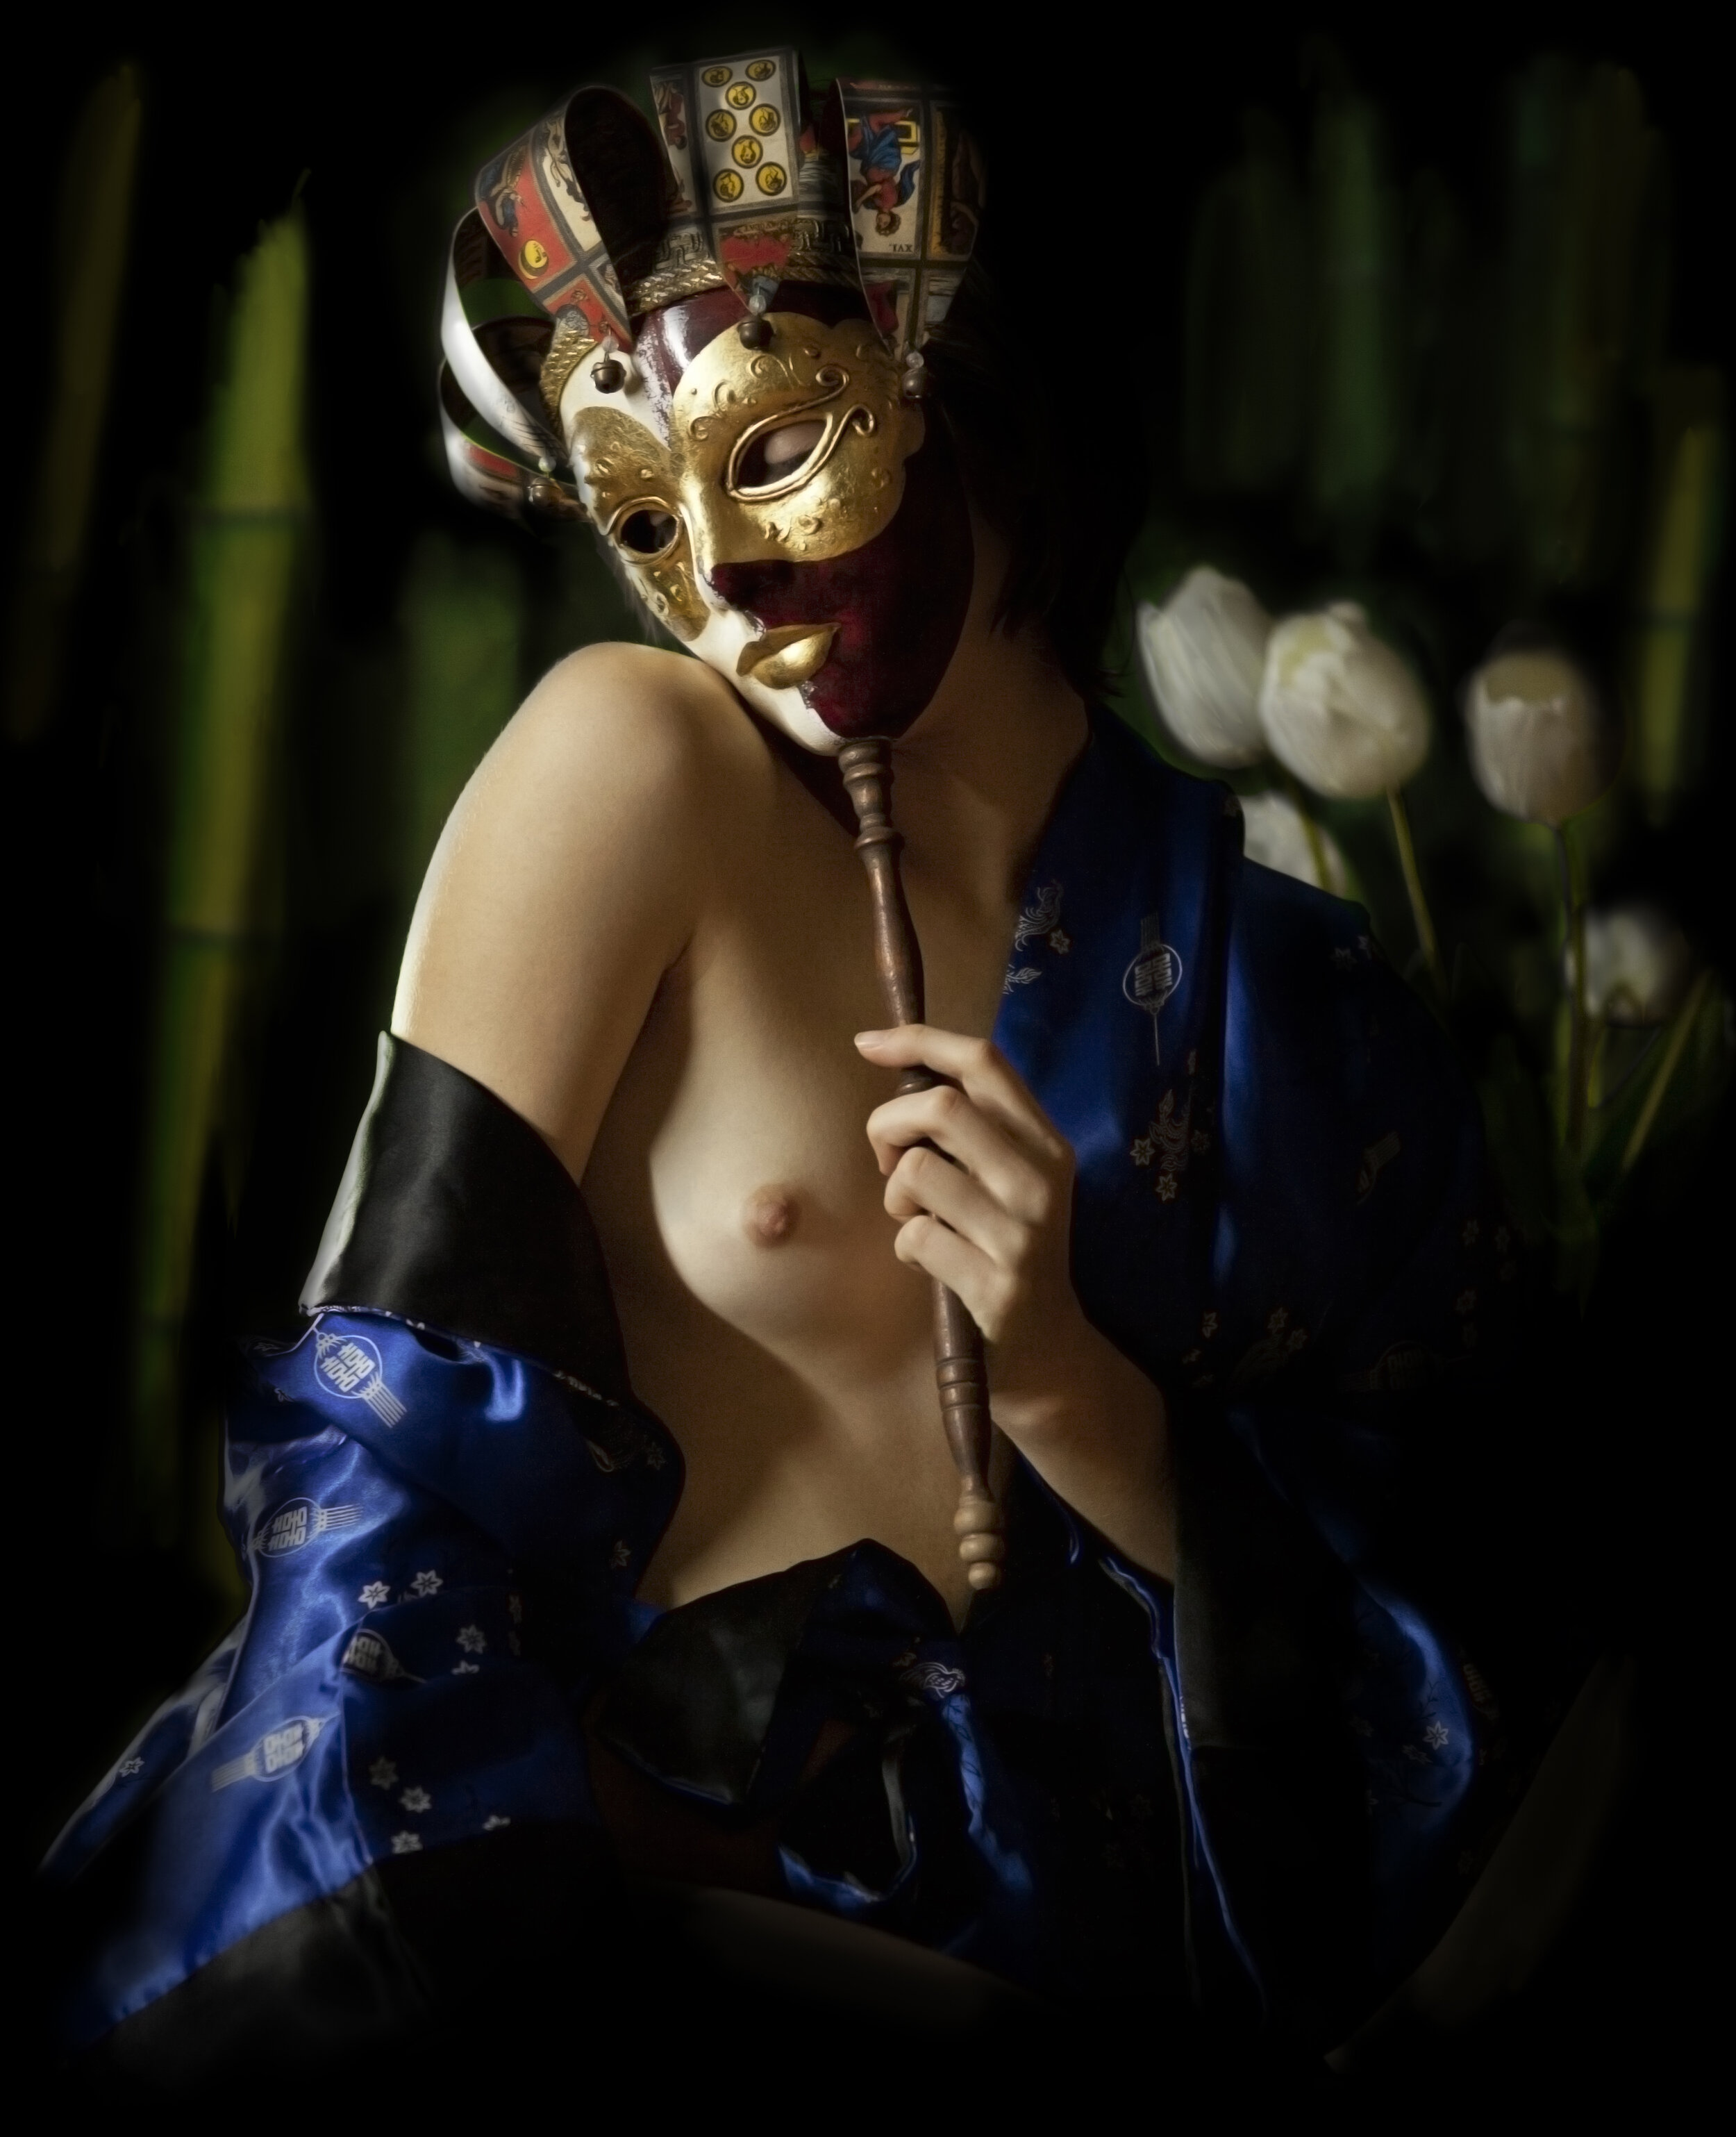 Nude With Mask.jpg